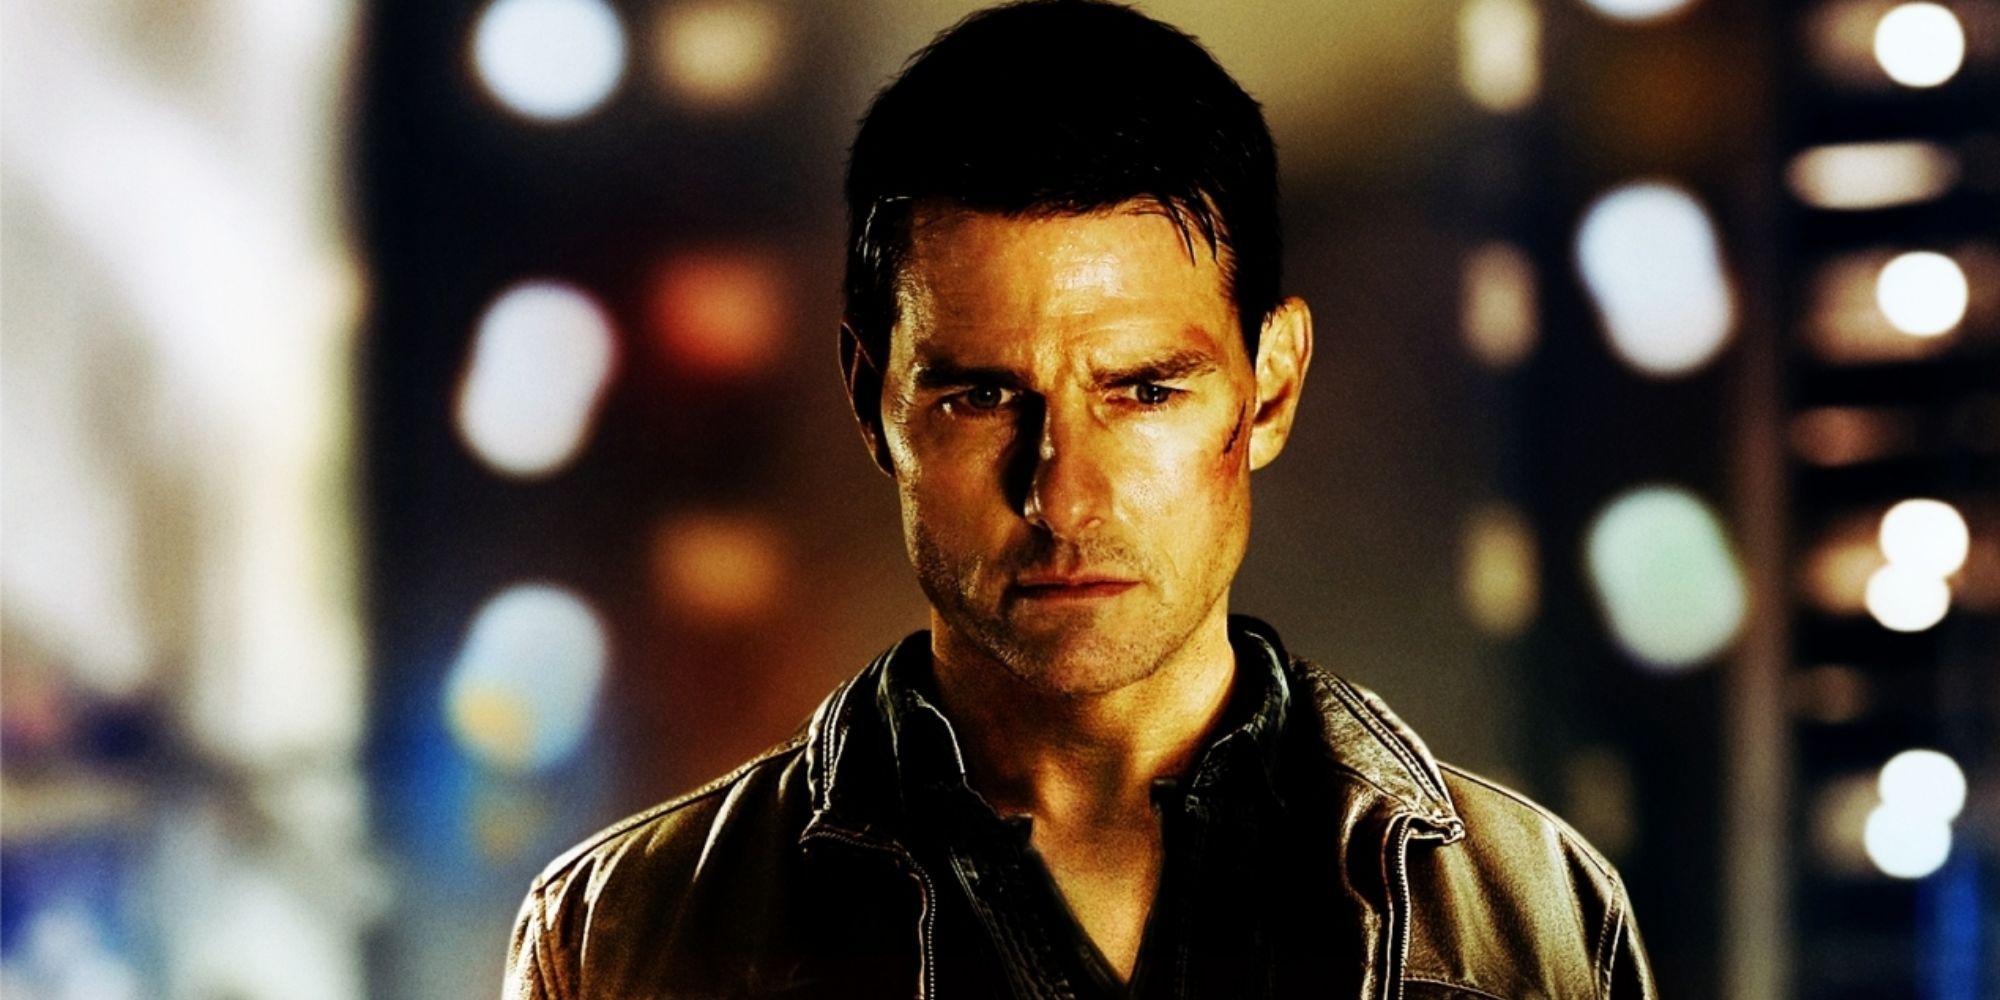 Tom Cruise as Jack Reacher in the poster for Jack Reacher